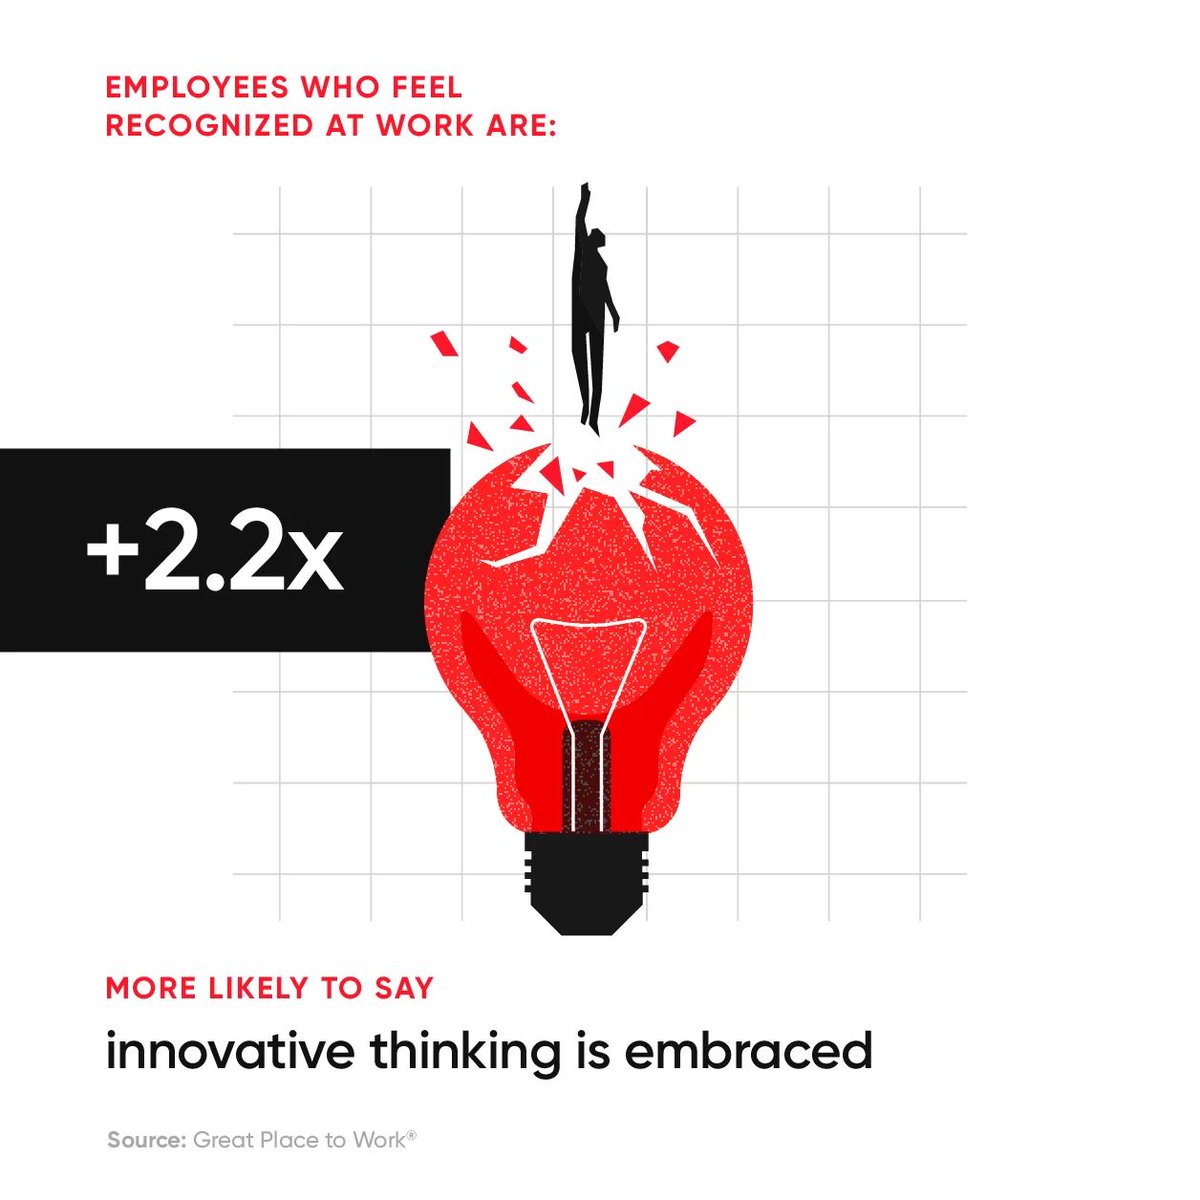 Did you know that employees who feel recognized at work are 2.2 times more likely to say innovative thinking is embraced?

#employeerecognition #PositiveFeedback #WorkplaceTransforation #EmployeeWellbeing #EnhancingWorkLife #EmployeeMotivation